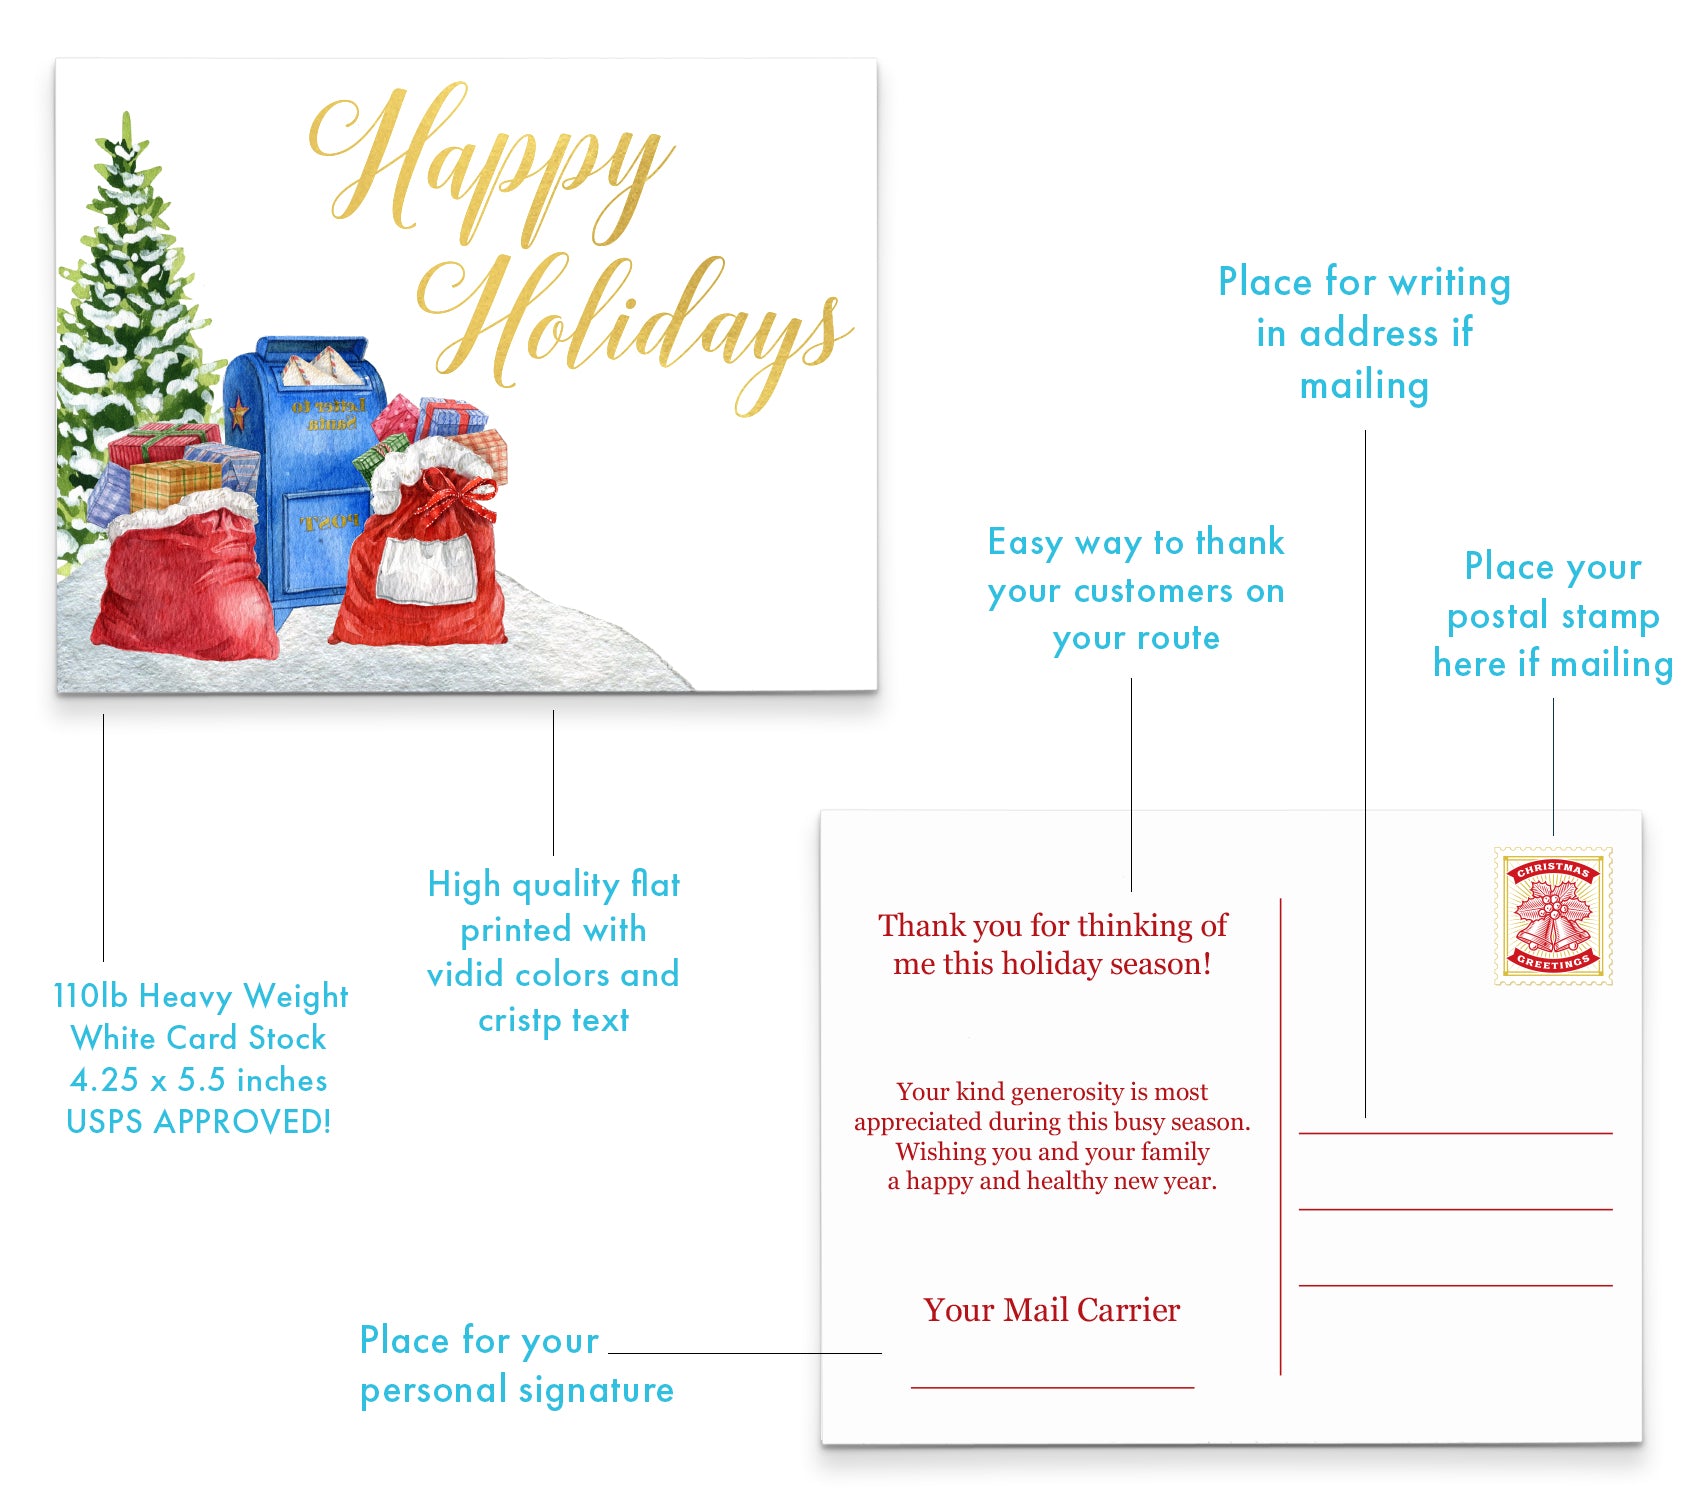 Happy Holiday Postcards for Mail Carrier with Holiday Mail - Modern Pink  Paper